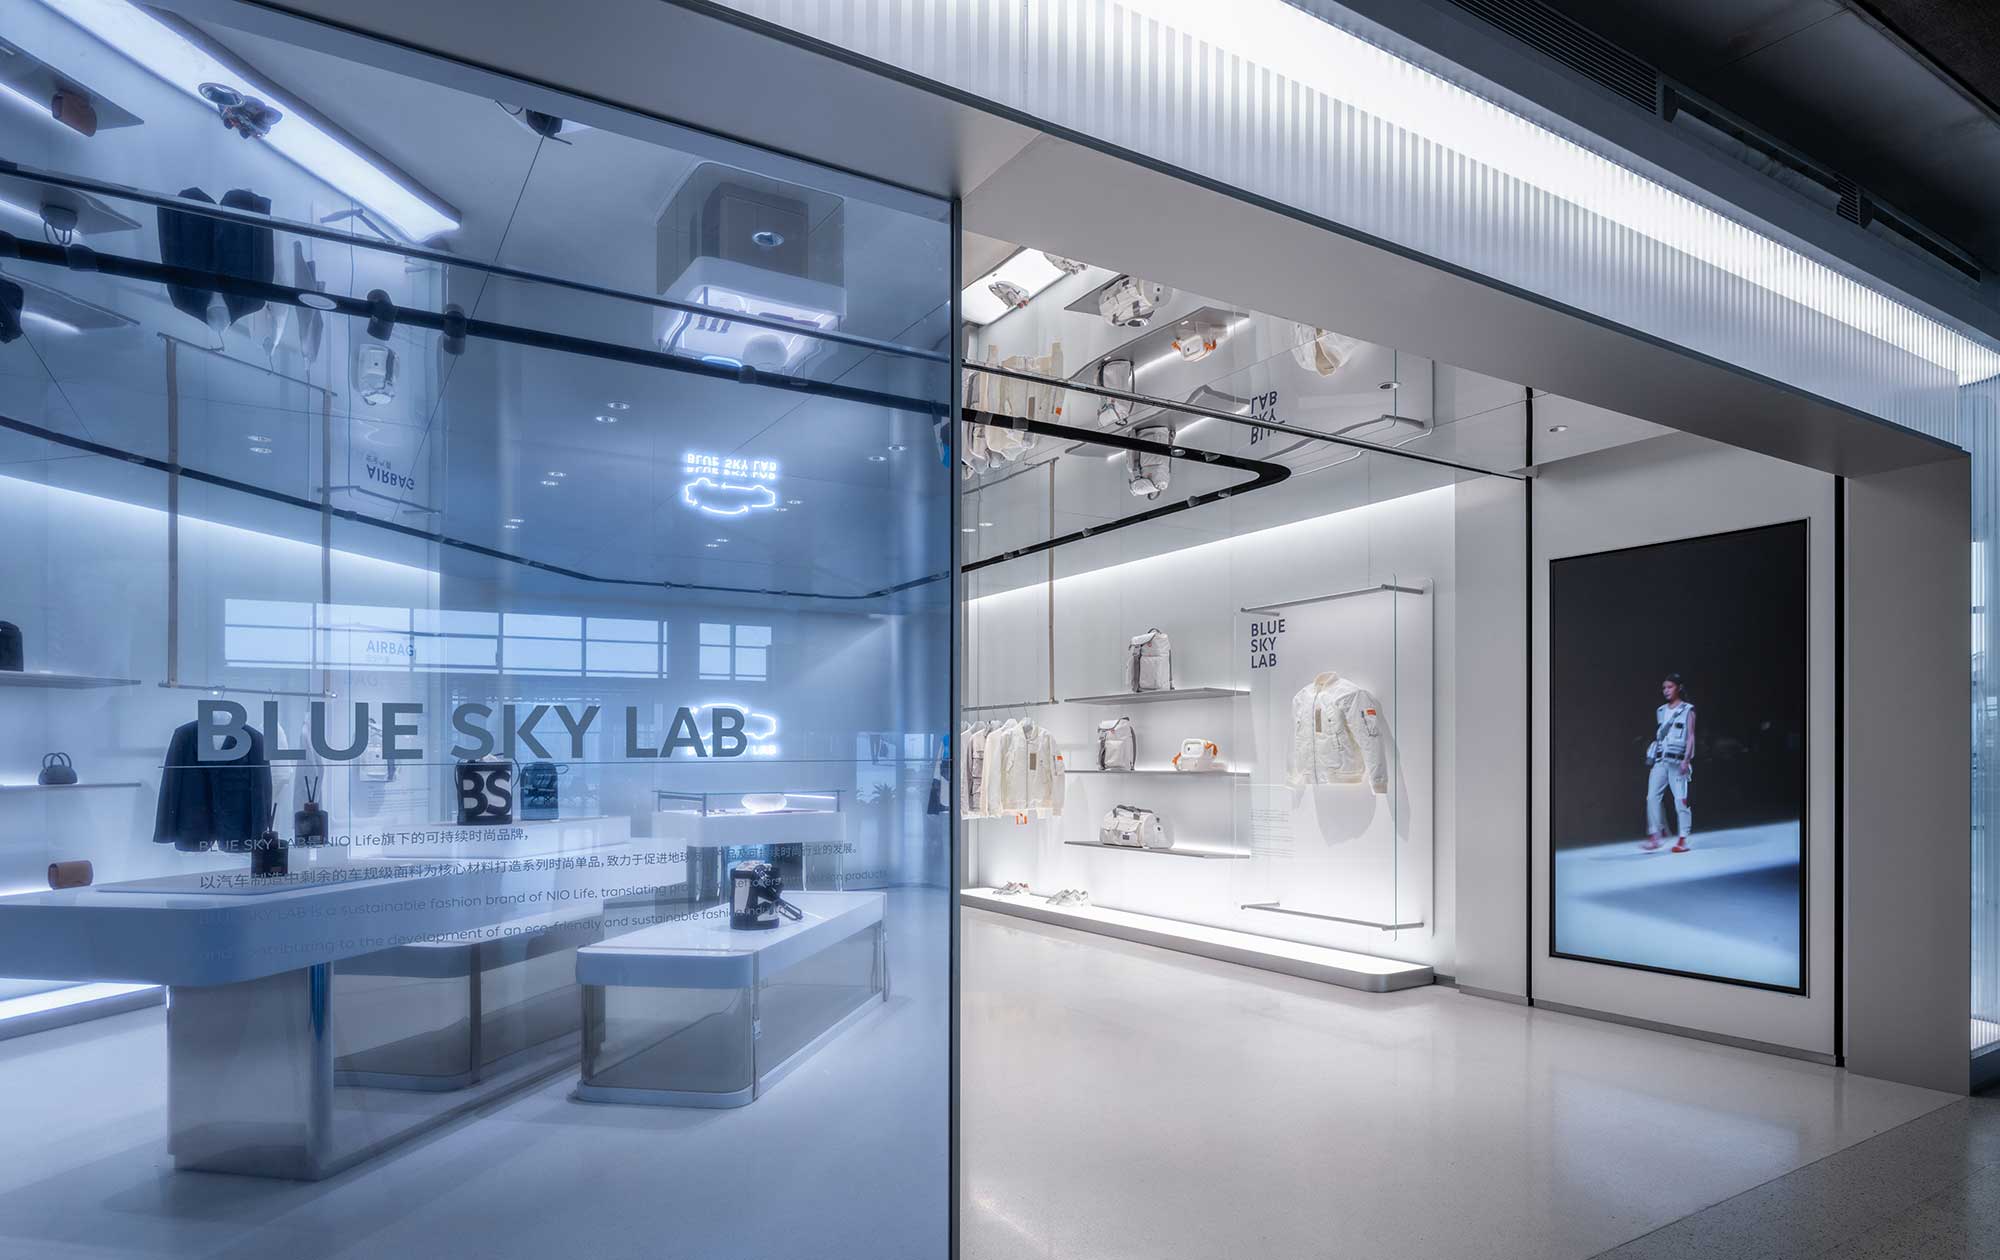 Shanghai’s Hongqiao Airport houses NIO’s first-ever airport retail store in the Chinese airport space